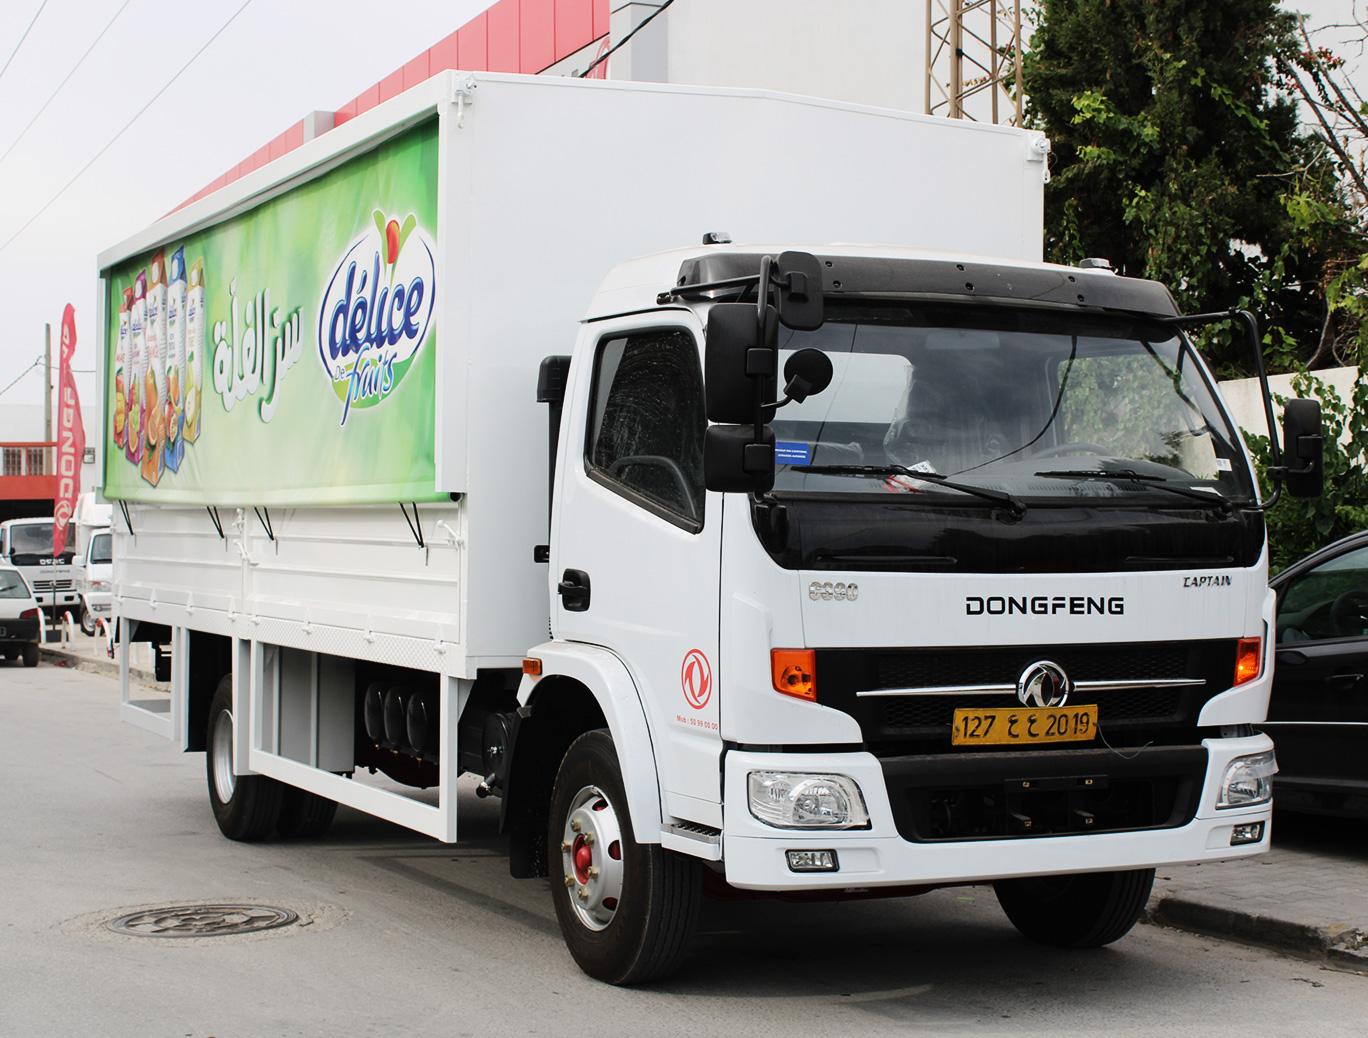 Camion DONGFENG CAPTAIN C93